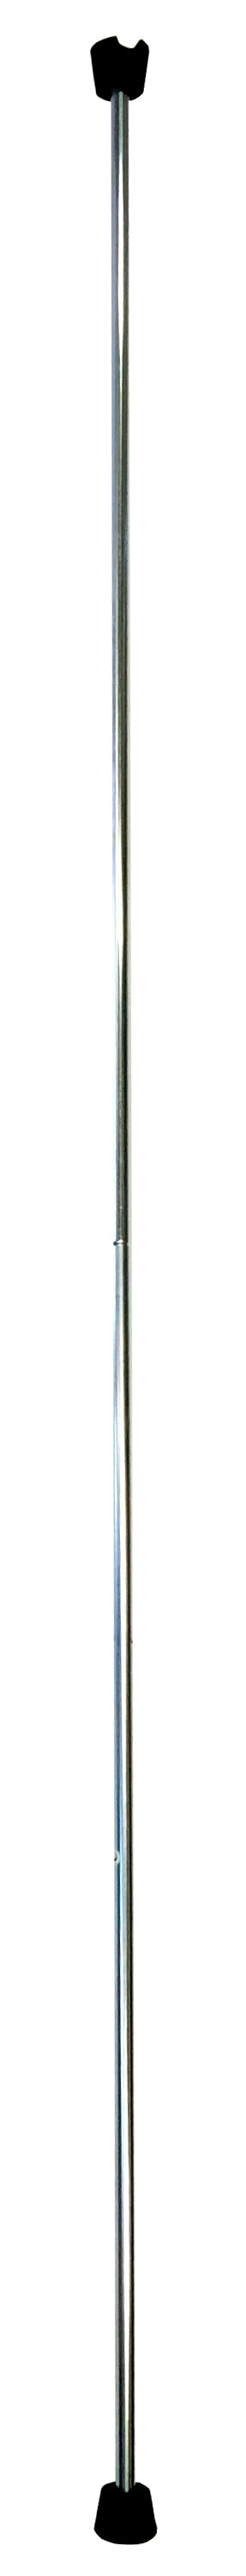 Mammoth Support Pole 2 m